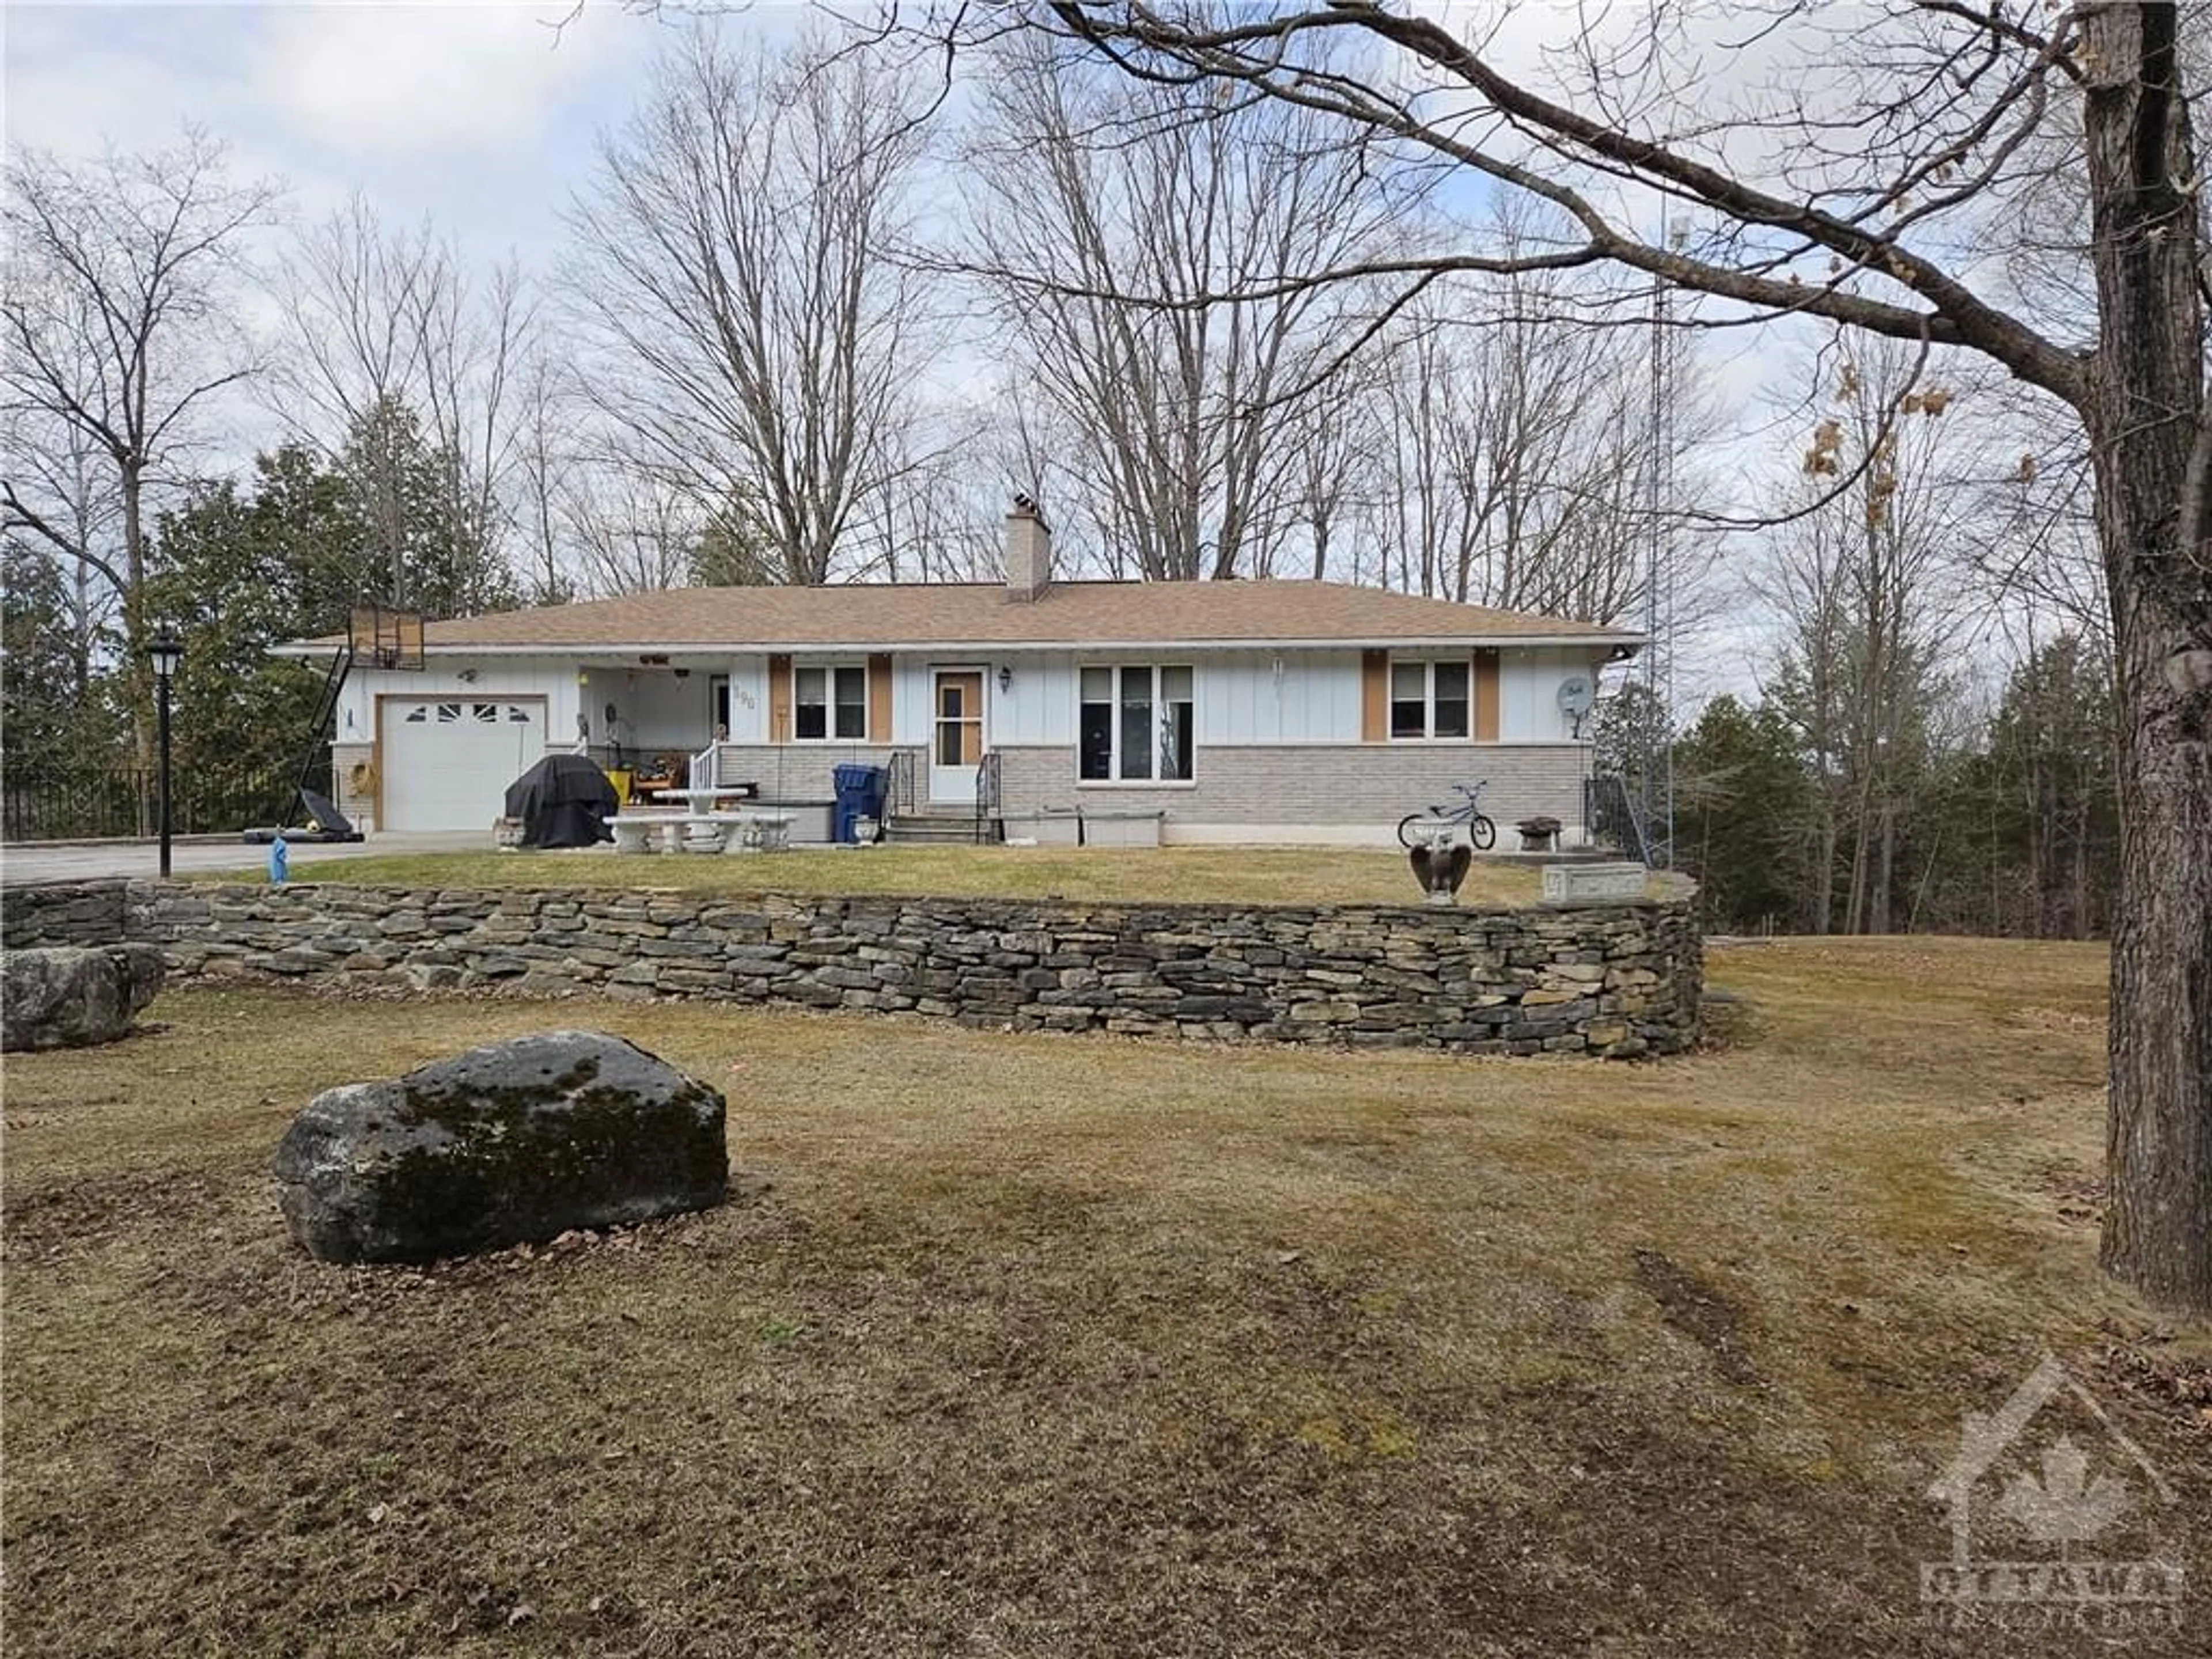 Home with unknown exterior material for 196 Camelon Rd, Almonte Ontario K0A 1A0